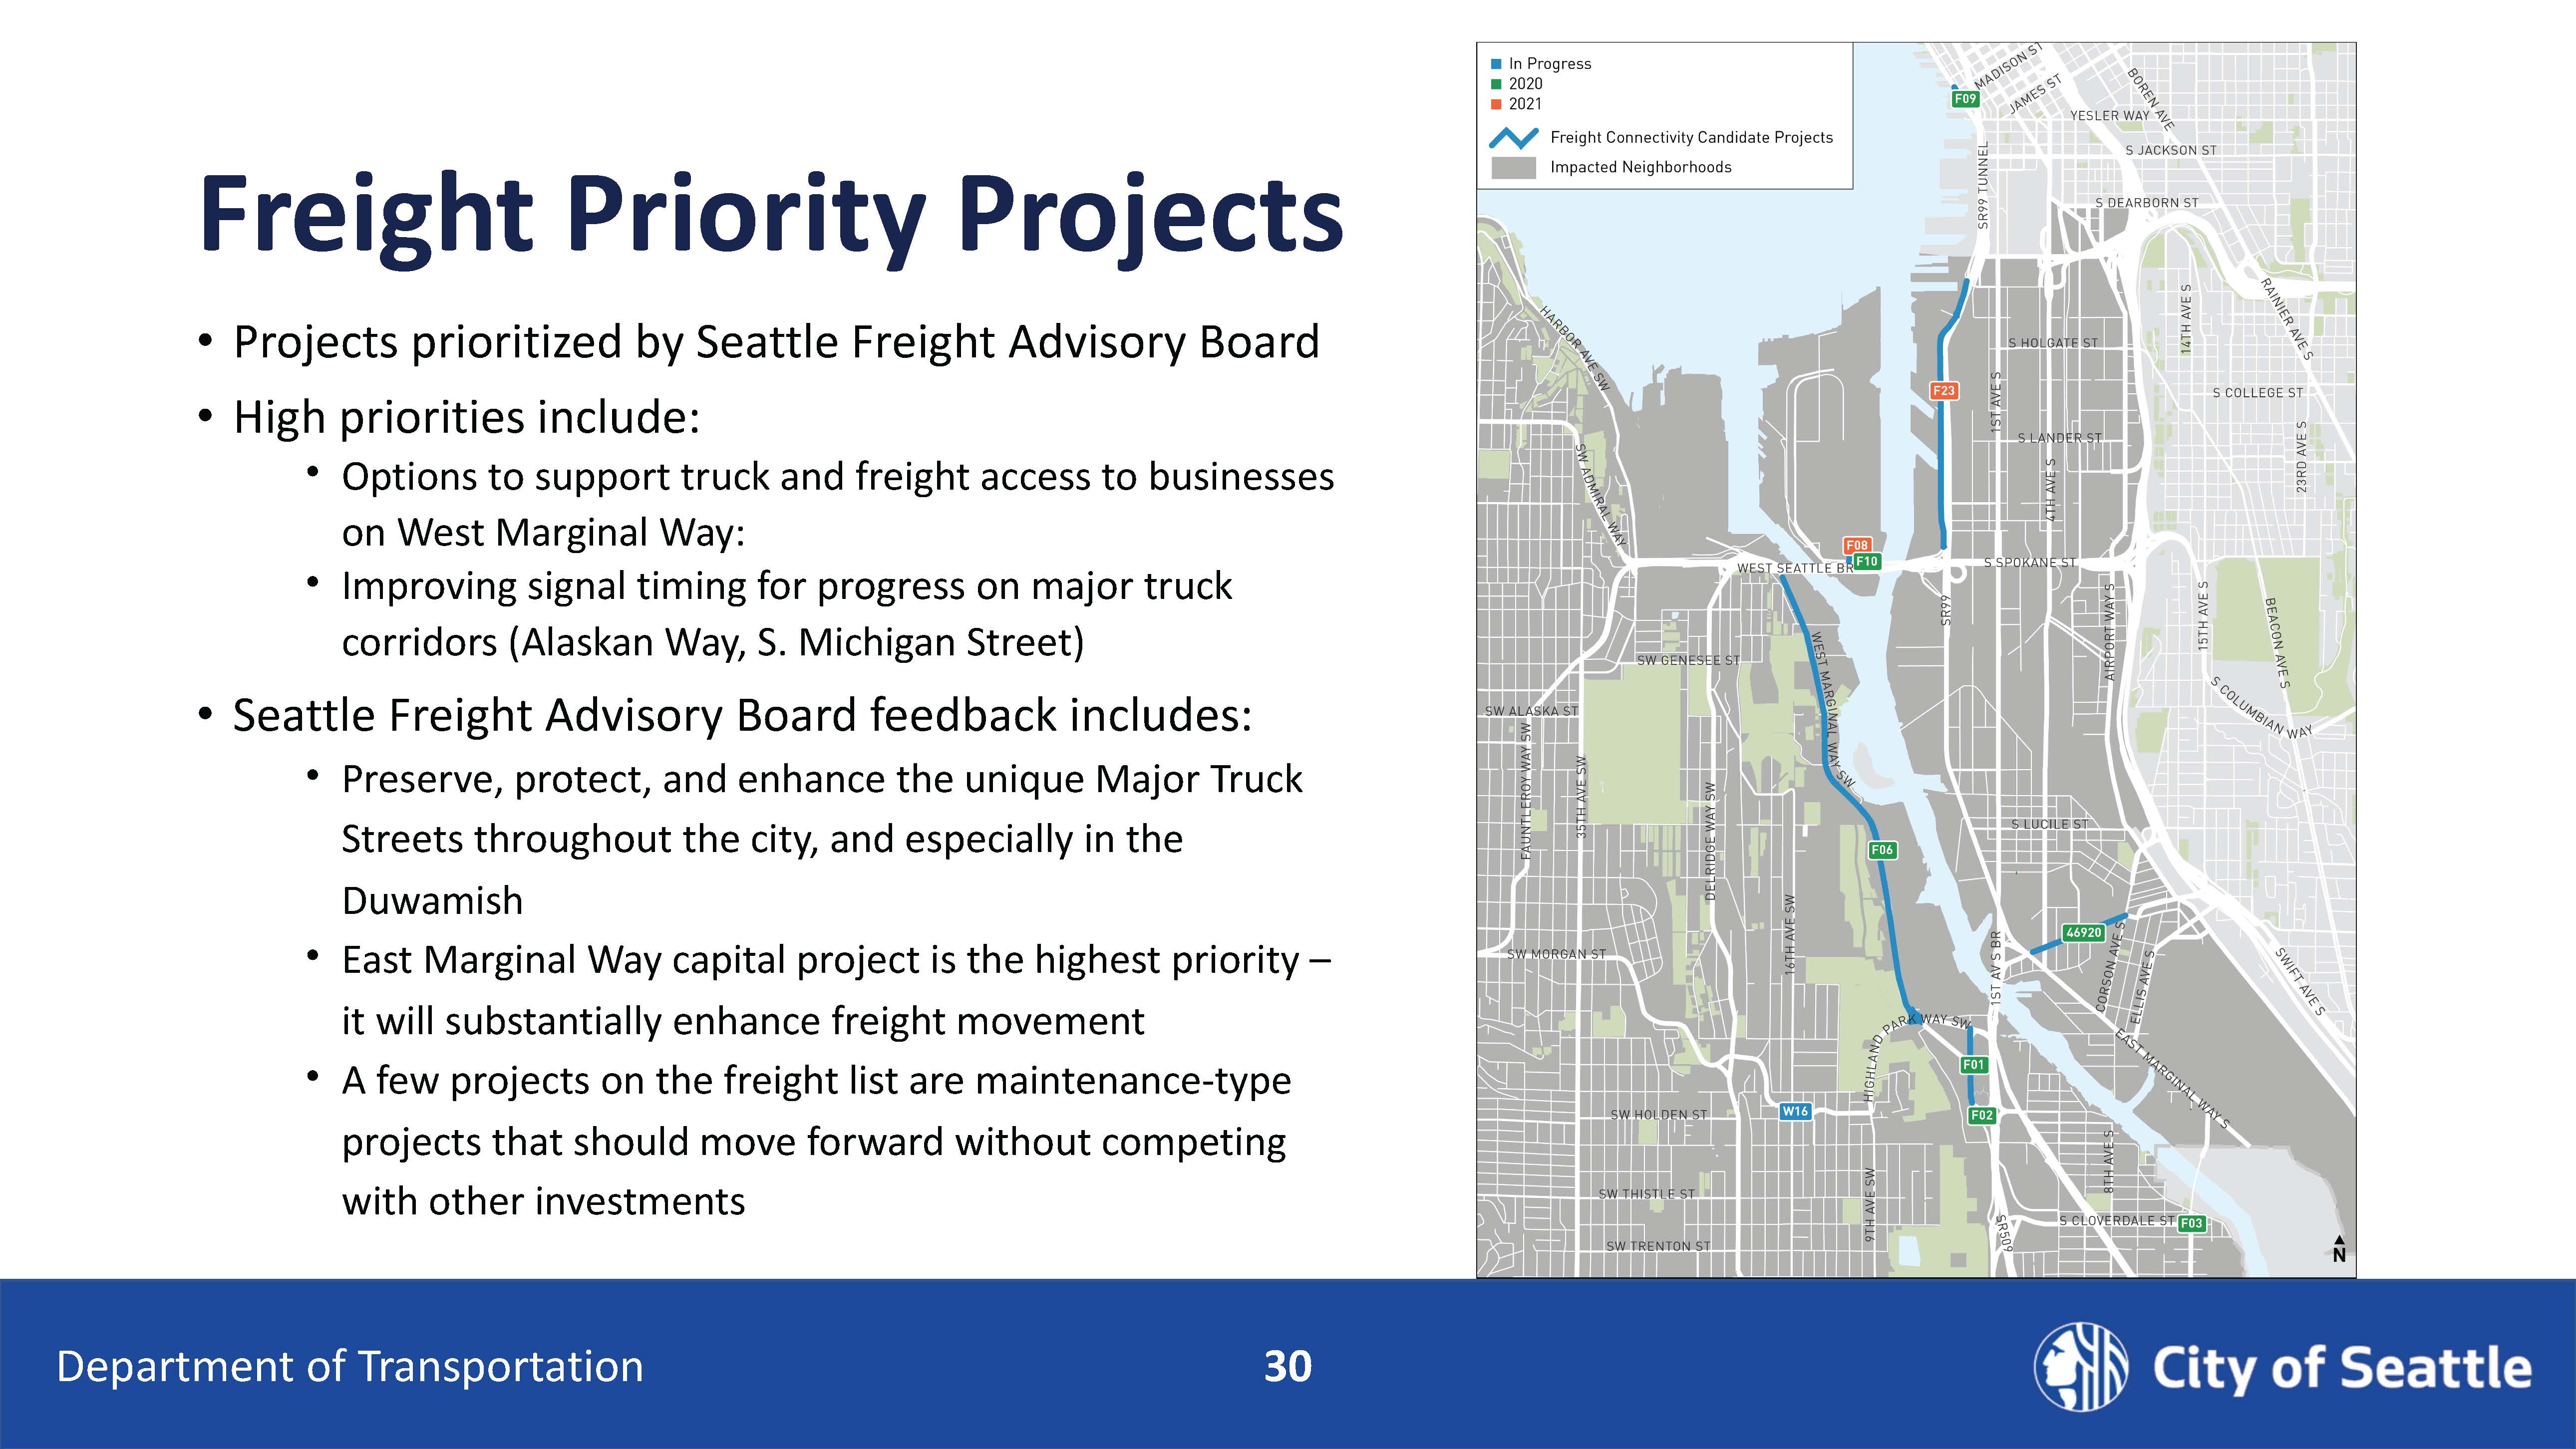 Freight priority projects